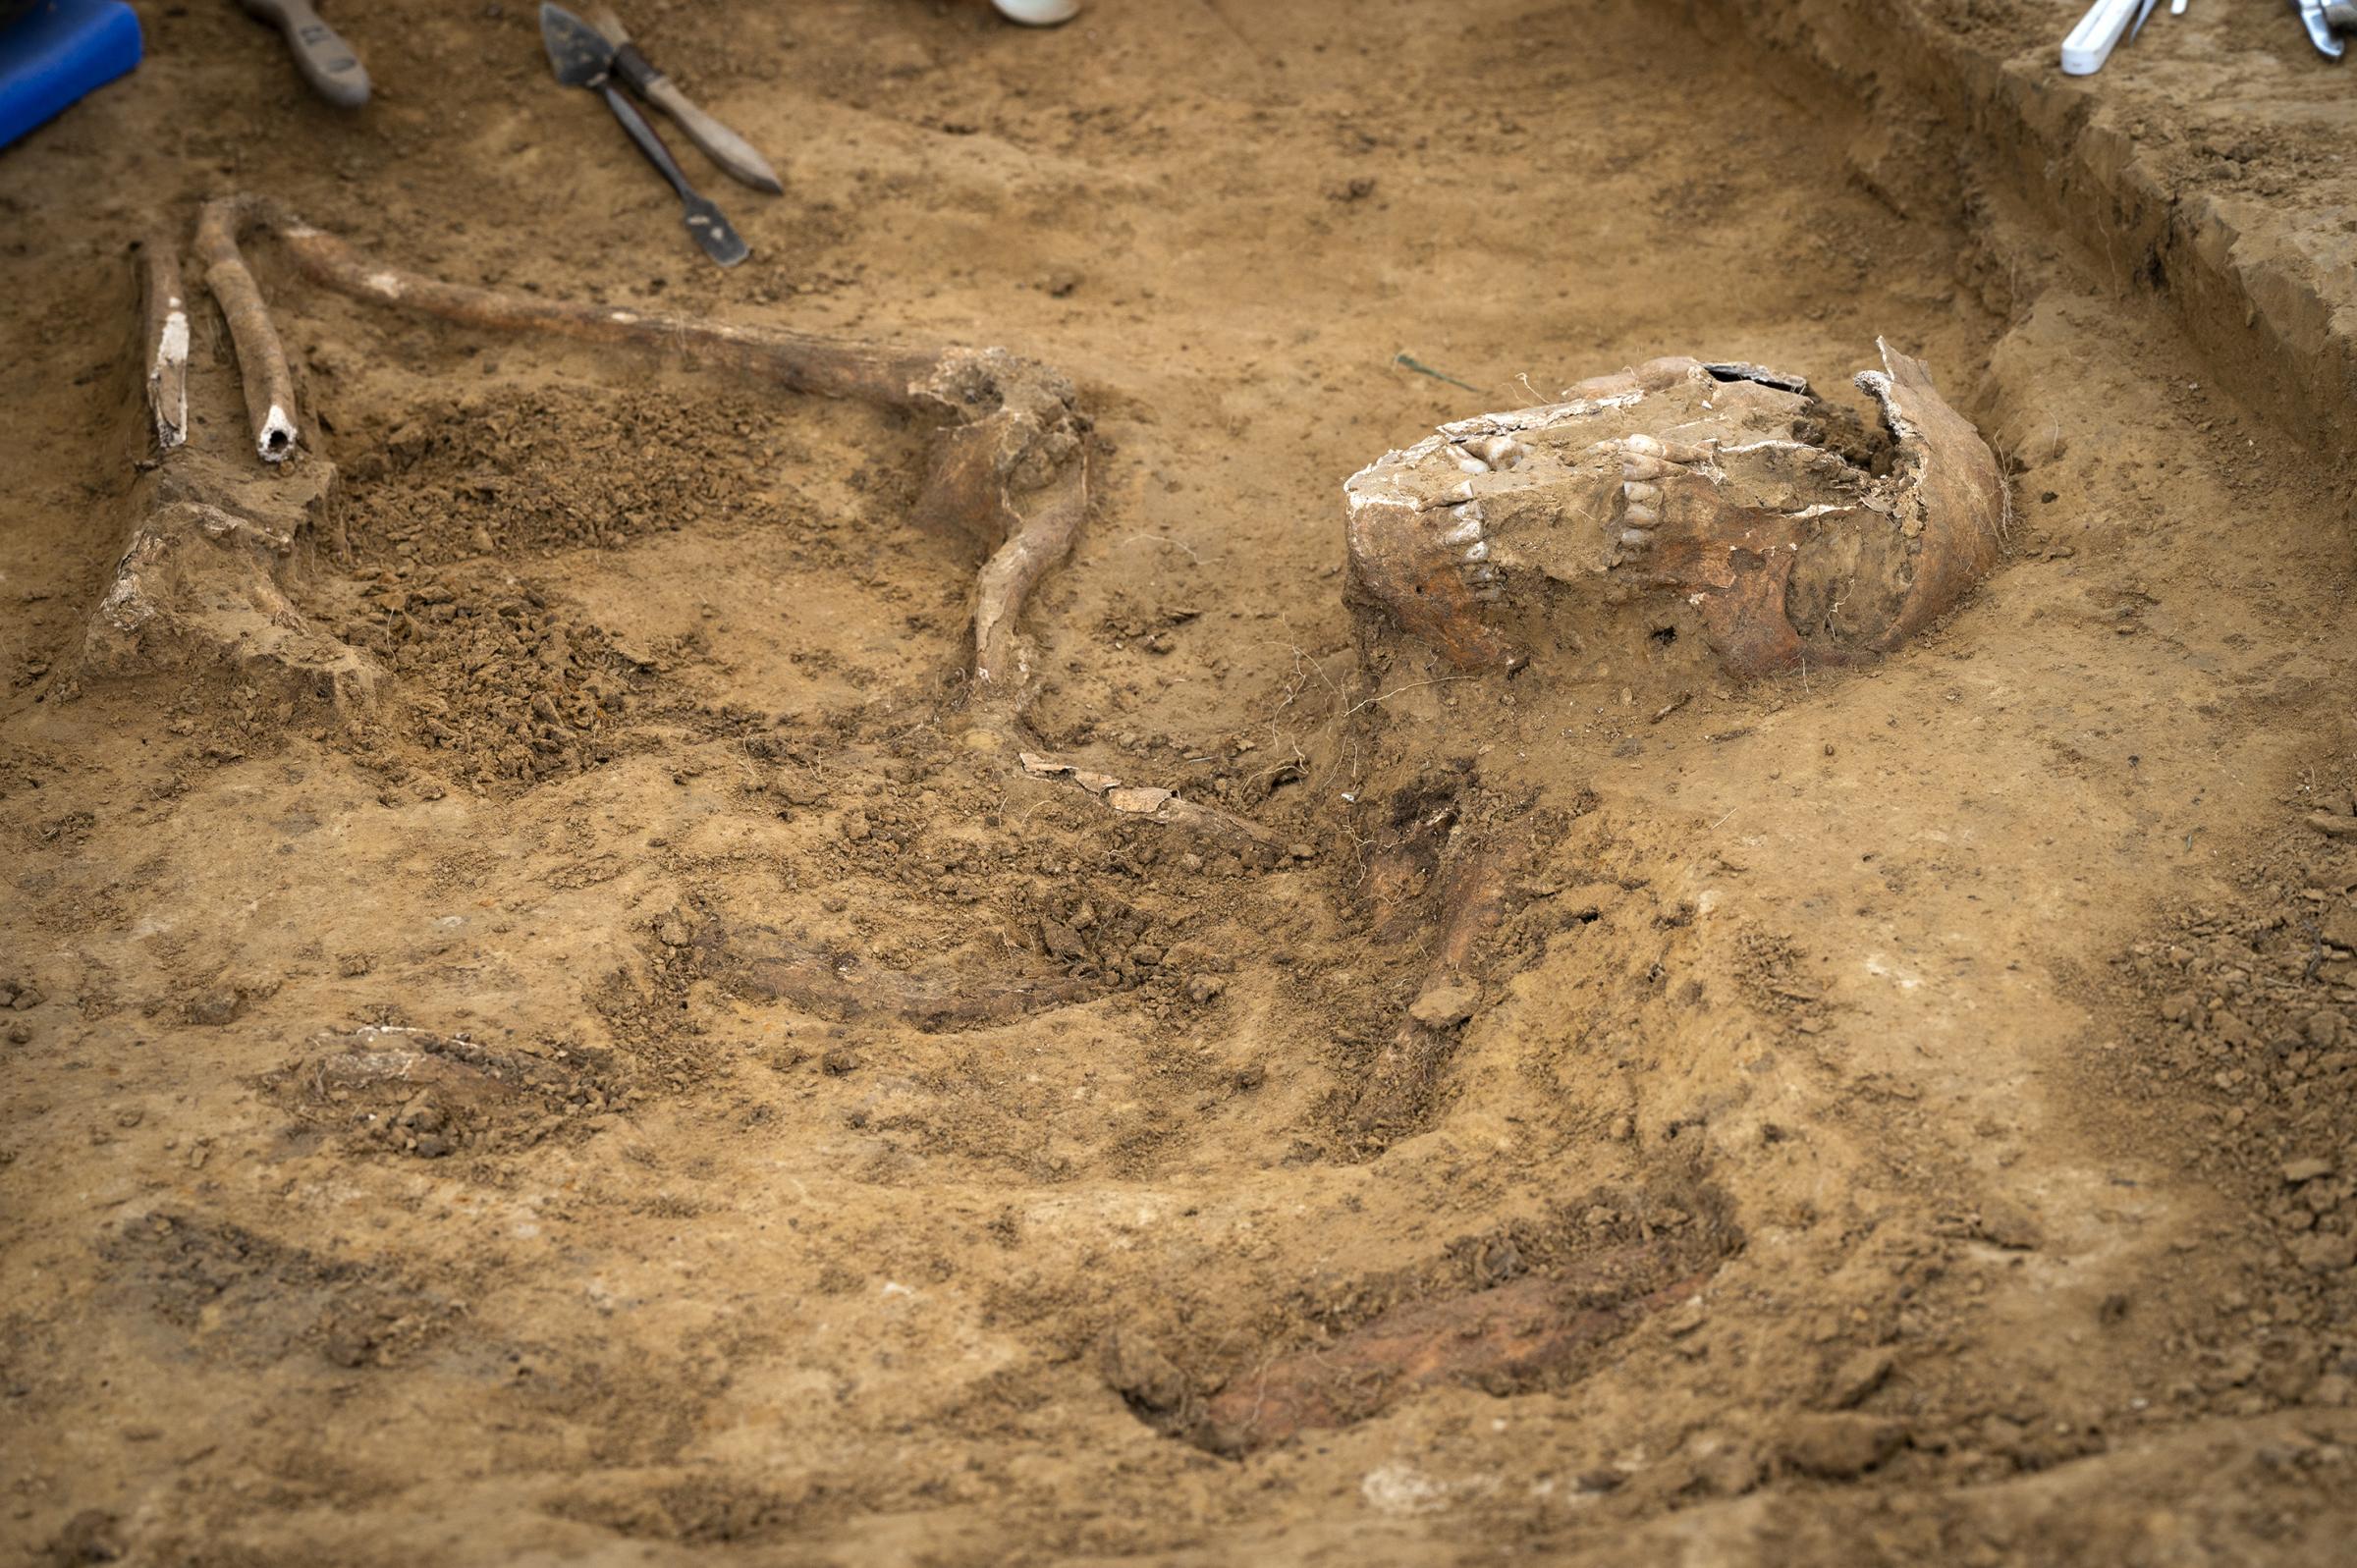 Skull and arms were among the remains discovered